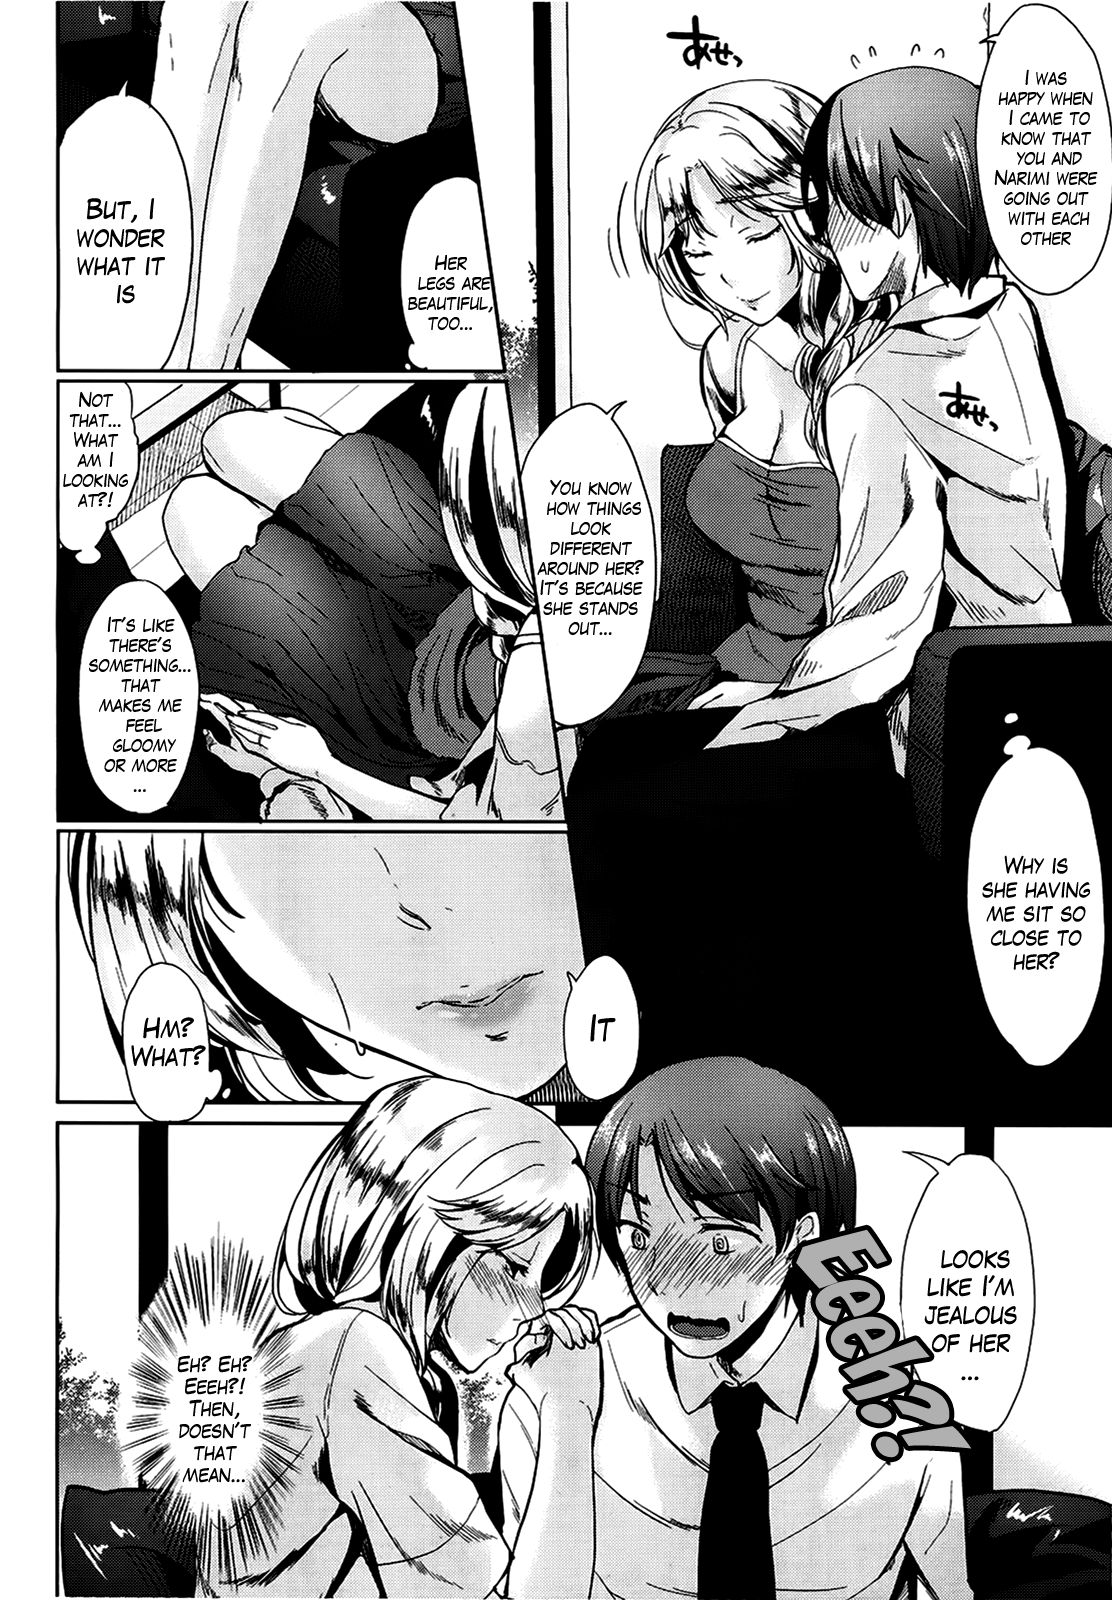 [Kawaisounako] Half Time~ Together with Ch. 1 and 2 (COMIC Tenma 2012) [English] [The Lusty Lady Project] 